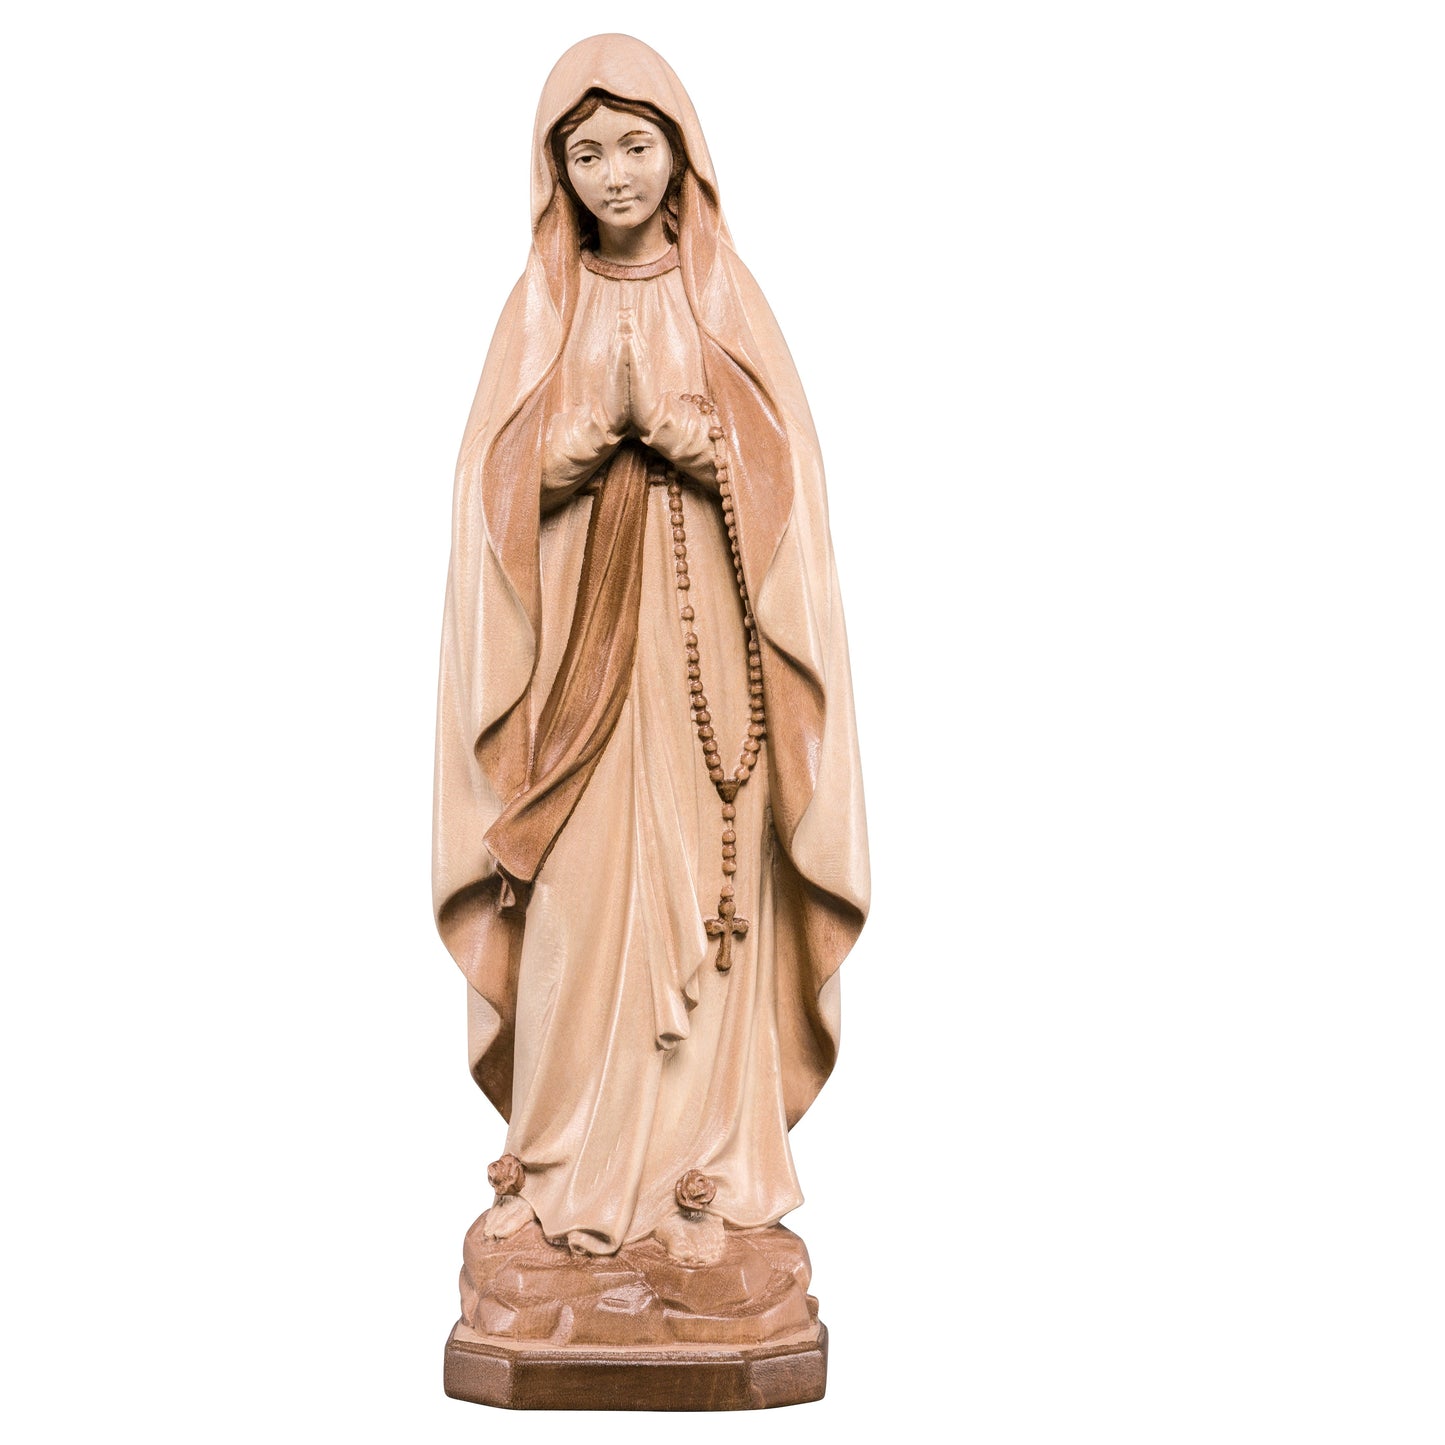 MONDO CATTOLICO Glossy / 10 cm (3.9 in) Wooden statue of Our Lady of Lourdes